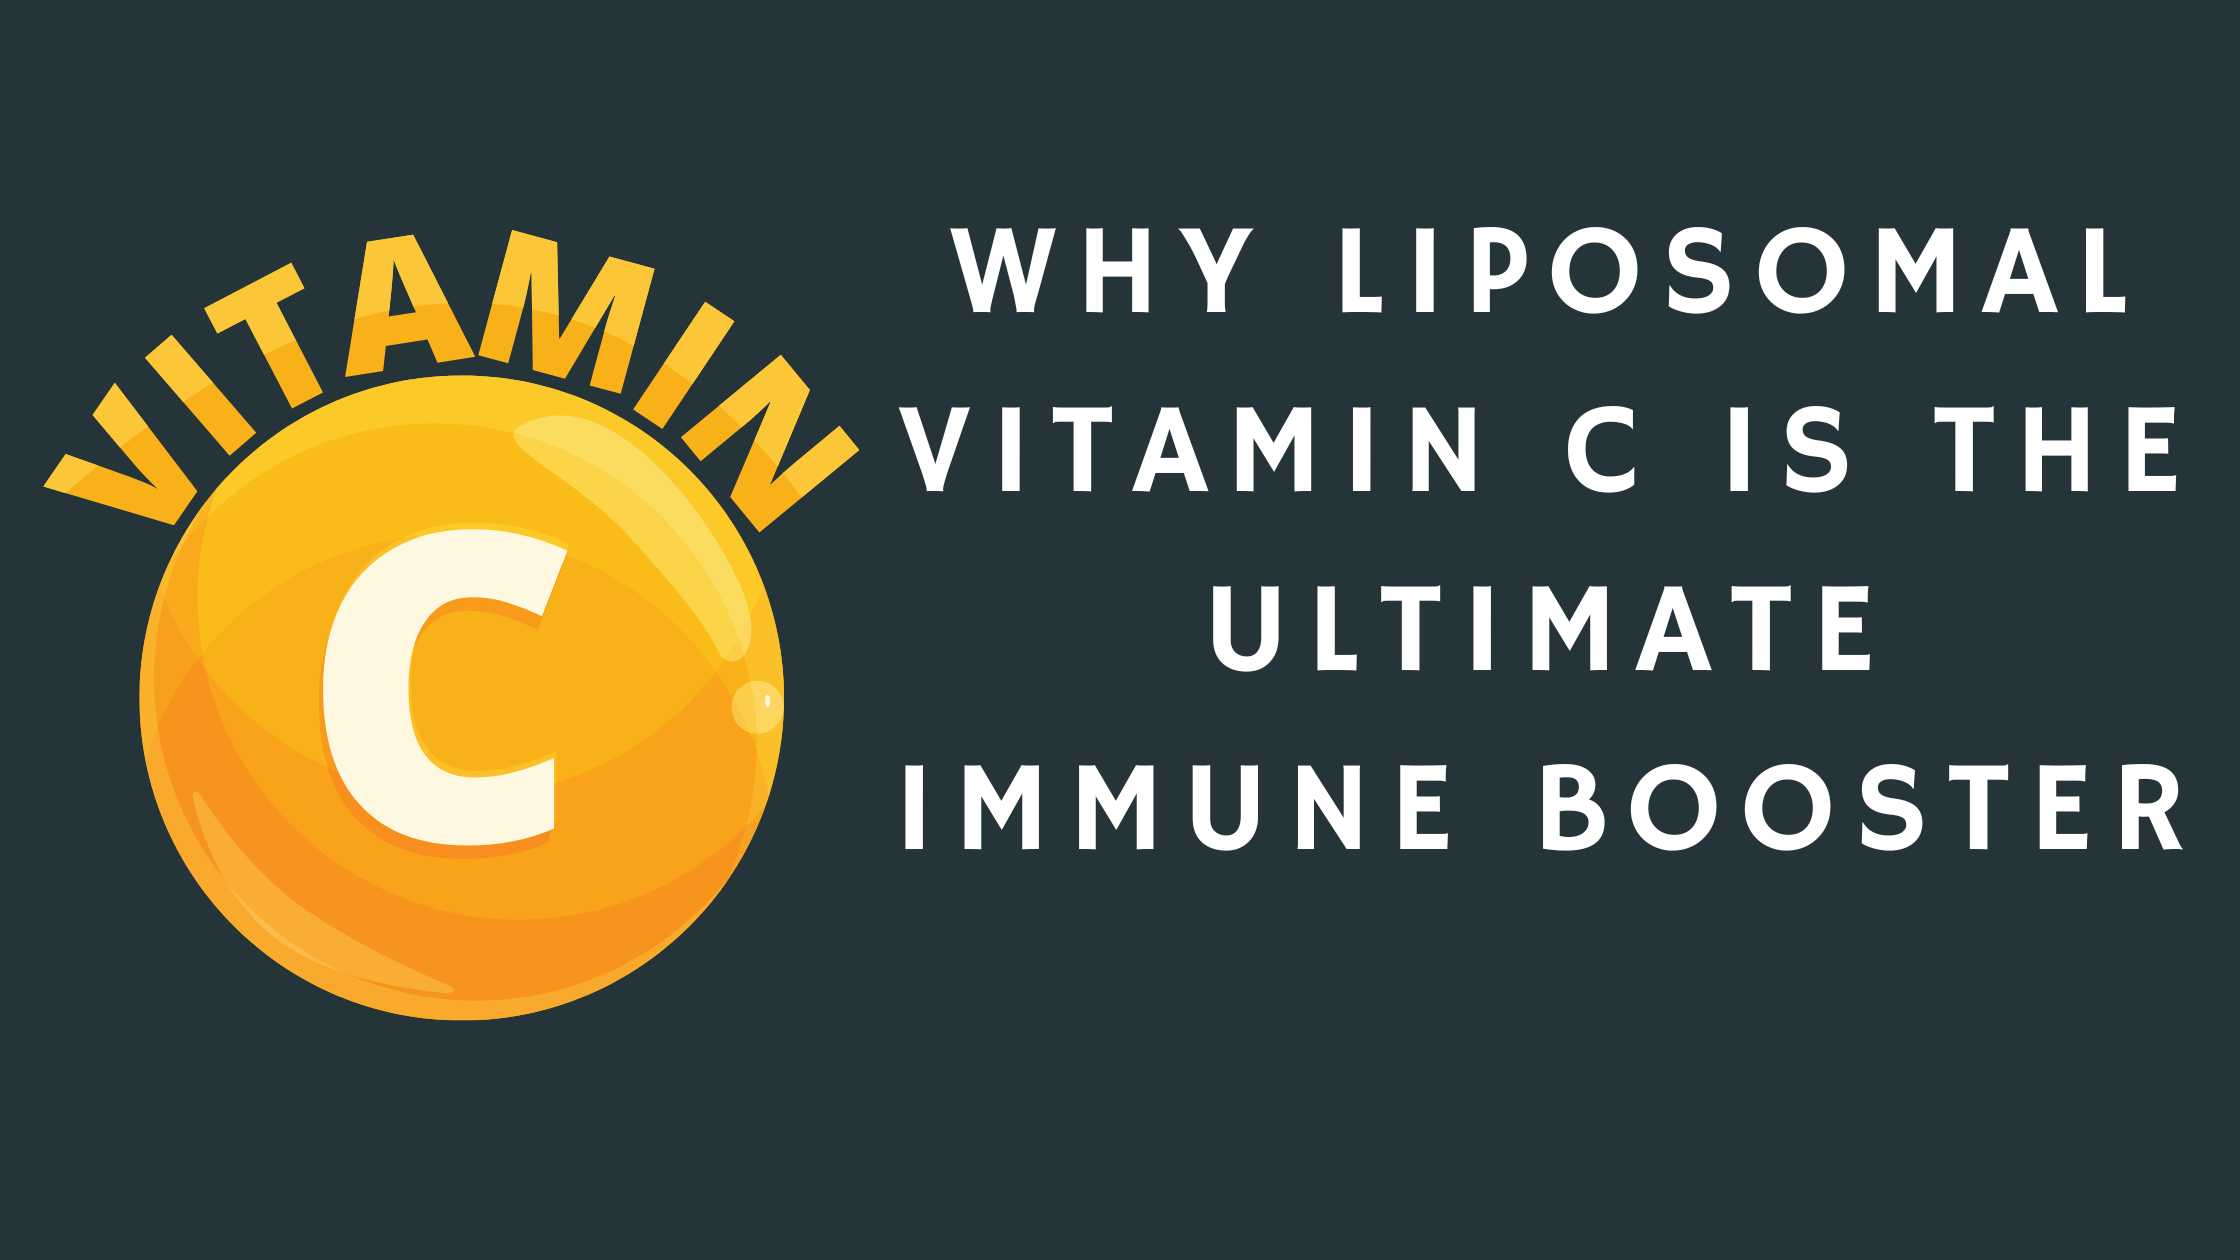 Why Liposomal Vitamin C is the Ultimate Immune Booster